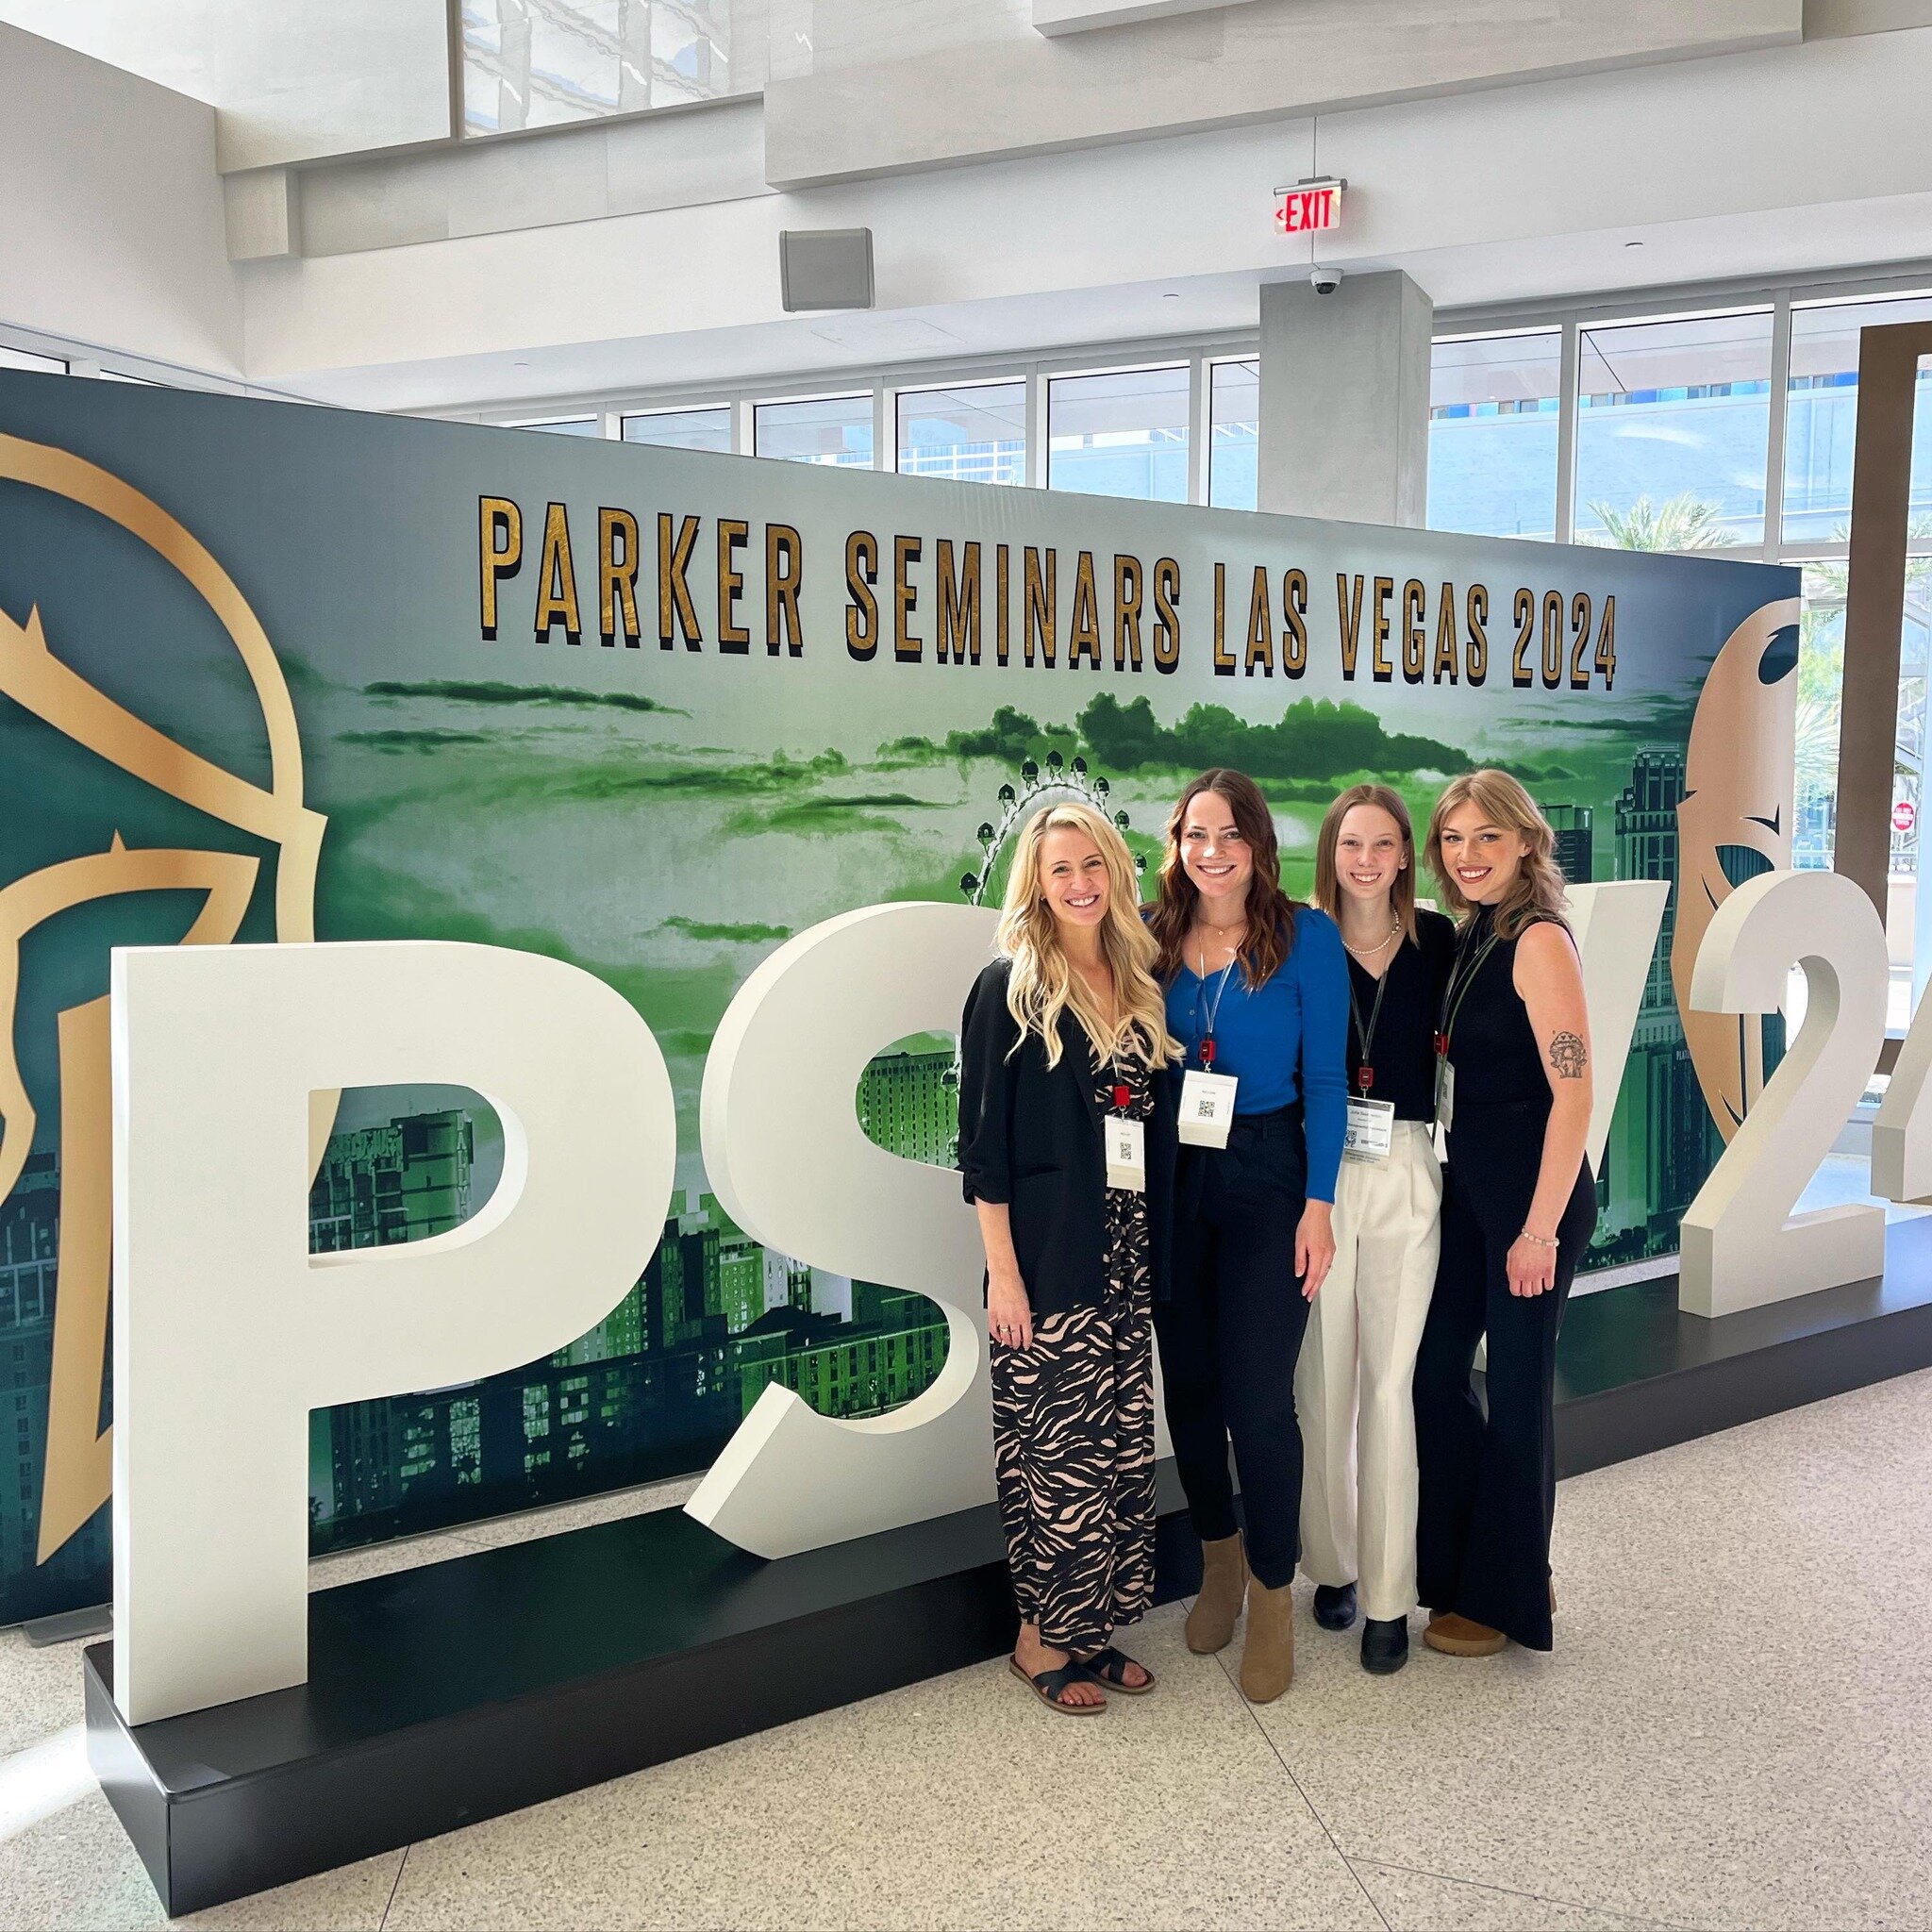 Parker Seminars Las Vegas 2024 was a success! 🎡✨

Our team is back in action today and ready to see all of our wonderful patients! 

#parkerseminars #parkerseminarslasvegas #parkerseminarslasvegas2024 #parkerseminars2024 #chiro #chiropractic #yxe #s